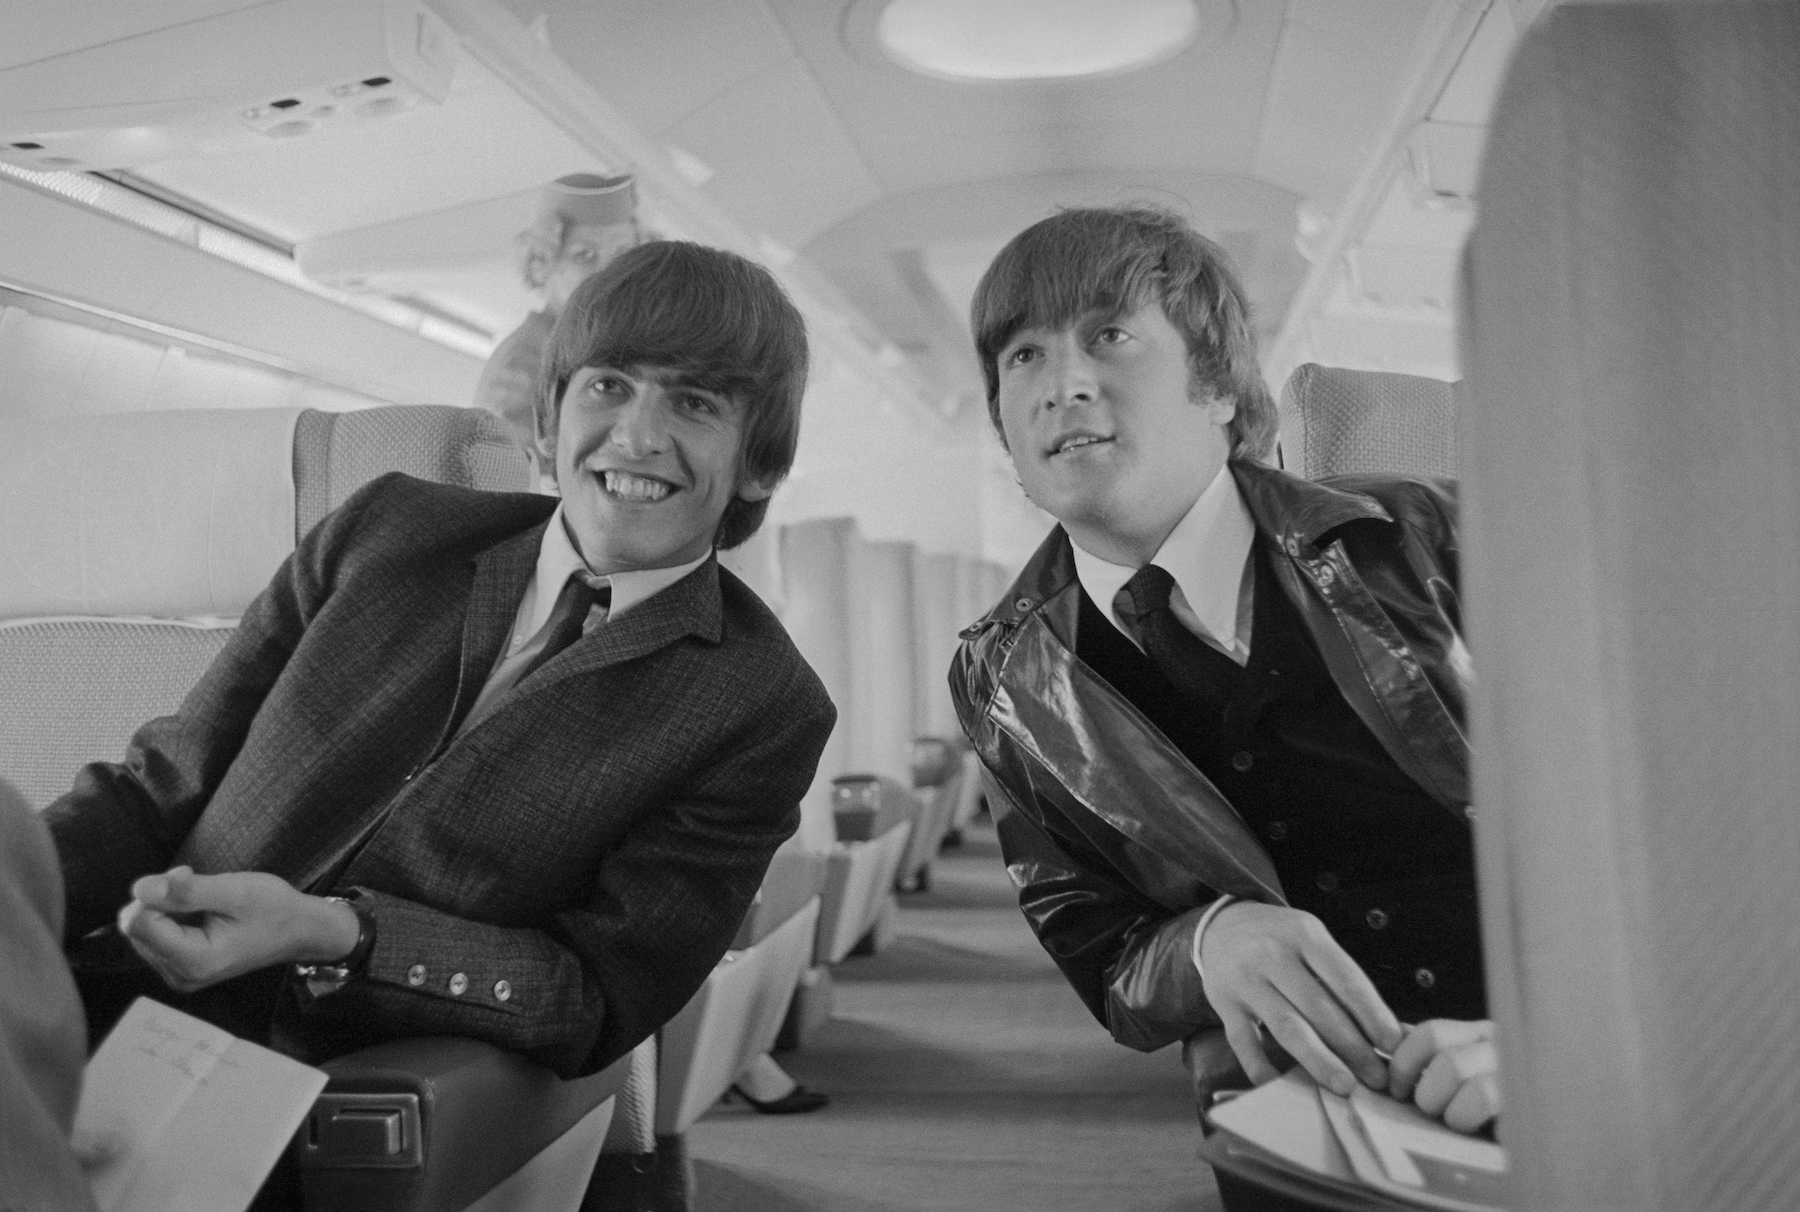 One half of the Beatles singing group, George Harrison (L) and John Lennon, are shown aboard their plane